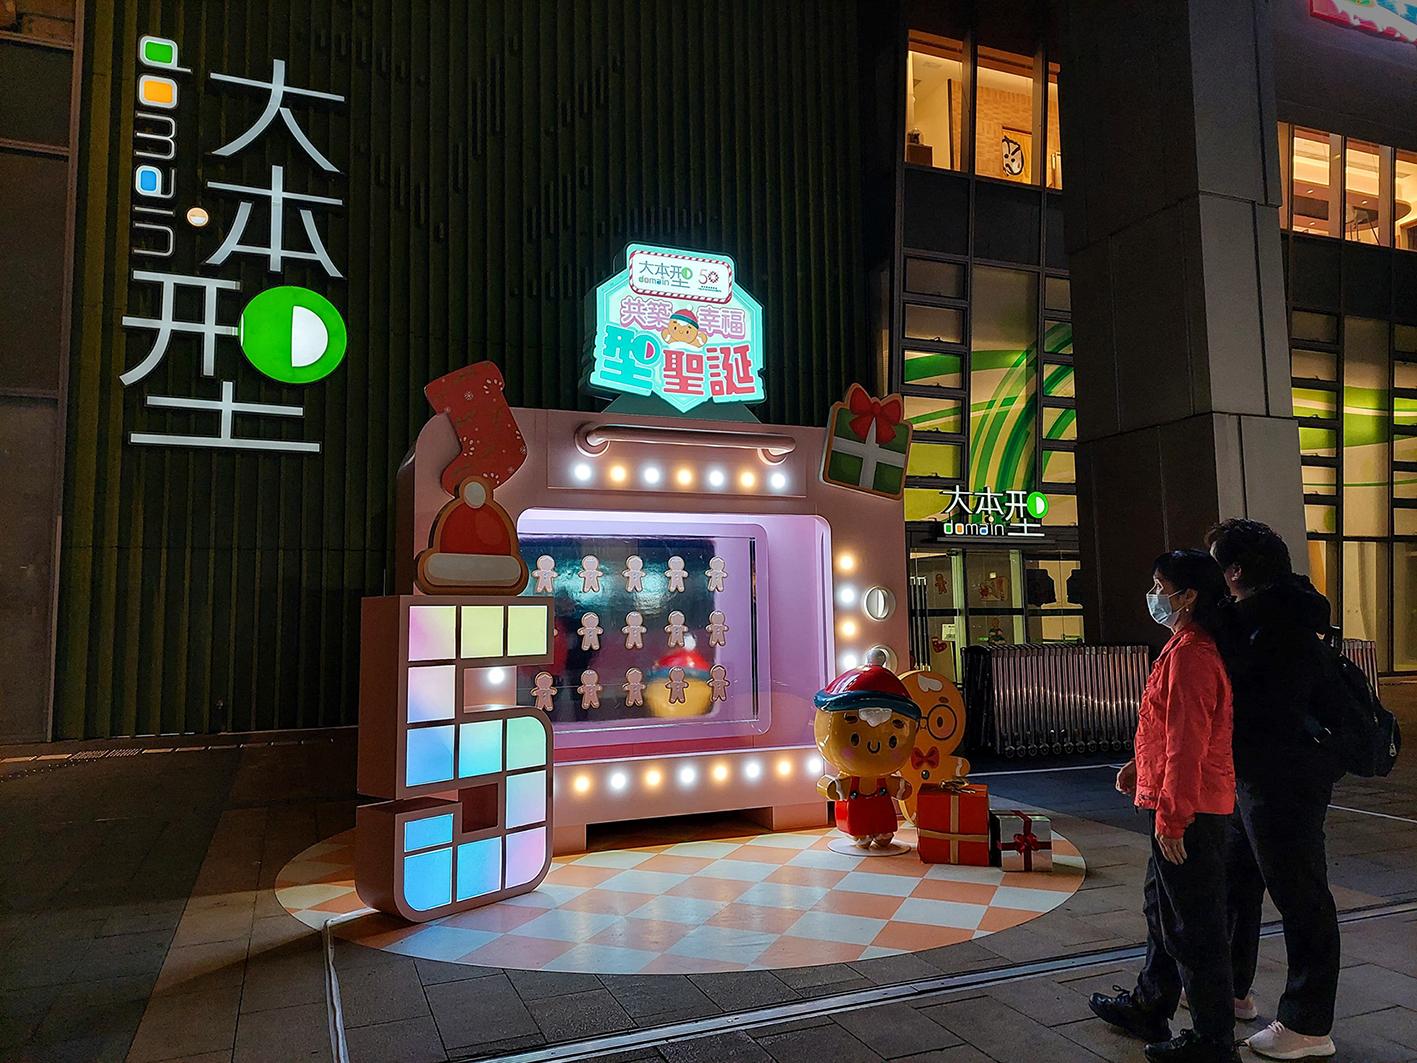 The Hong Kong Housing Authority (HA) is launching Christmas promotions and night vibe activities at its shopping centres to share the holiday season's joy with the public. Photo shows Christmas decorations with a gingerbread man family theme at the open plaza of the HA's regional shopping centre, Domain, in Yau Tong.